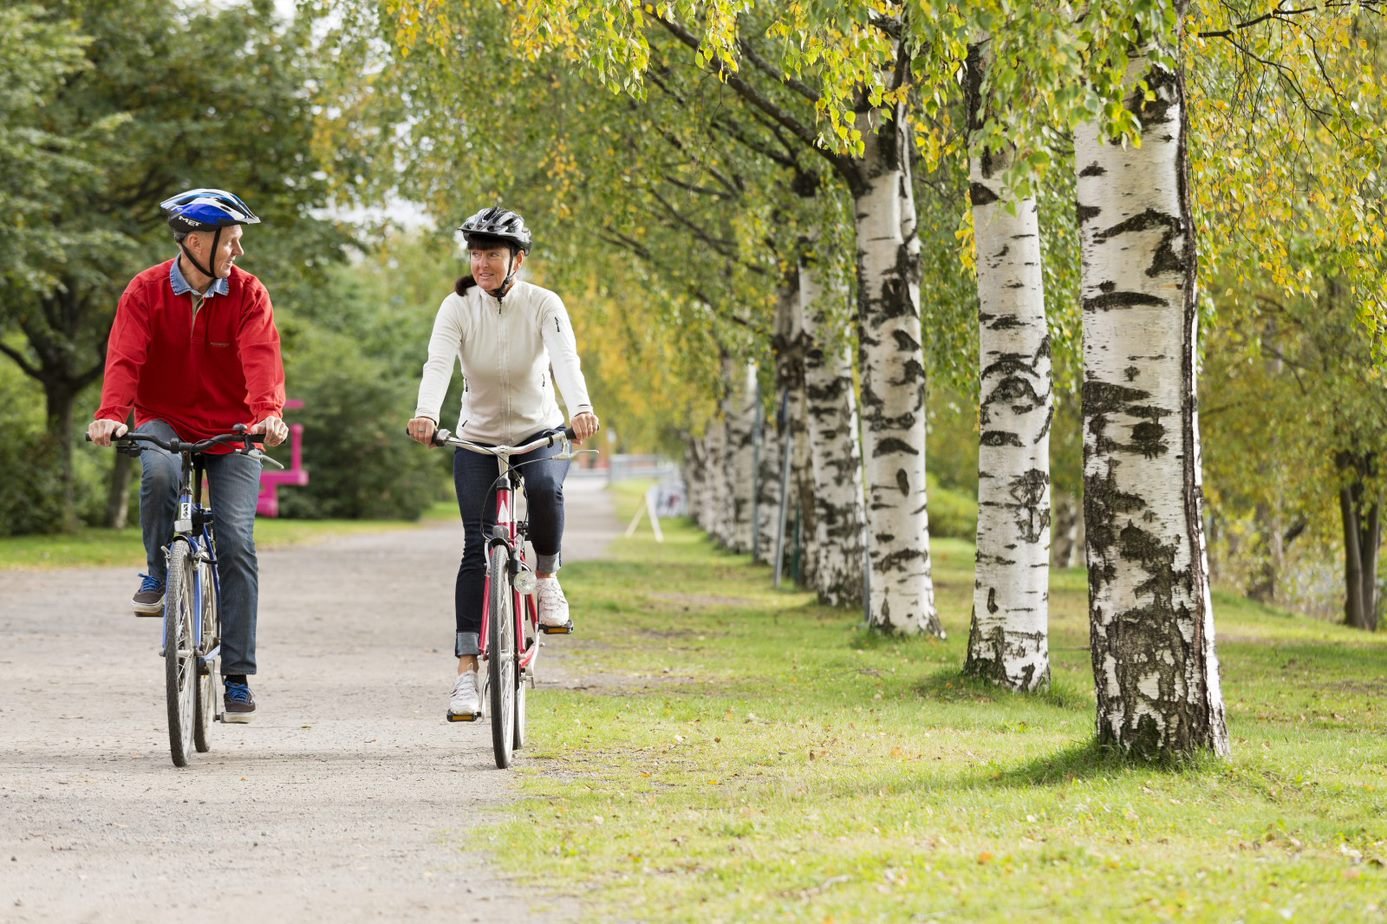 Discover the city on the country with the Stöcksjö tour.